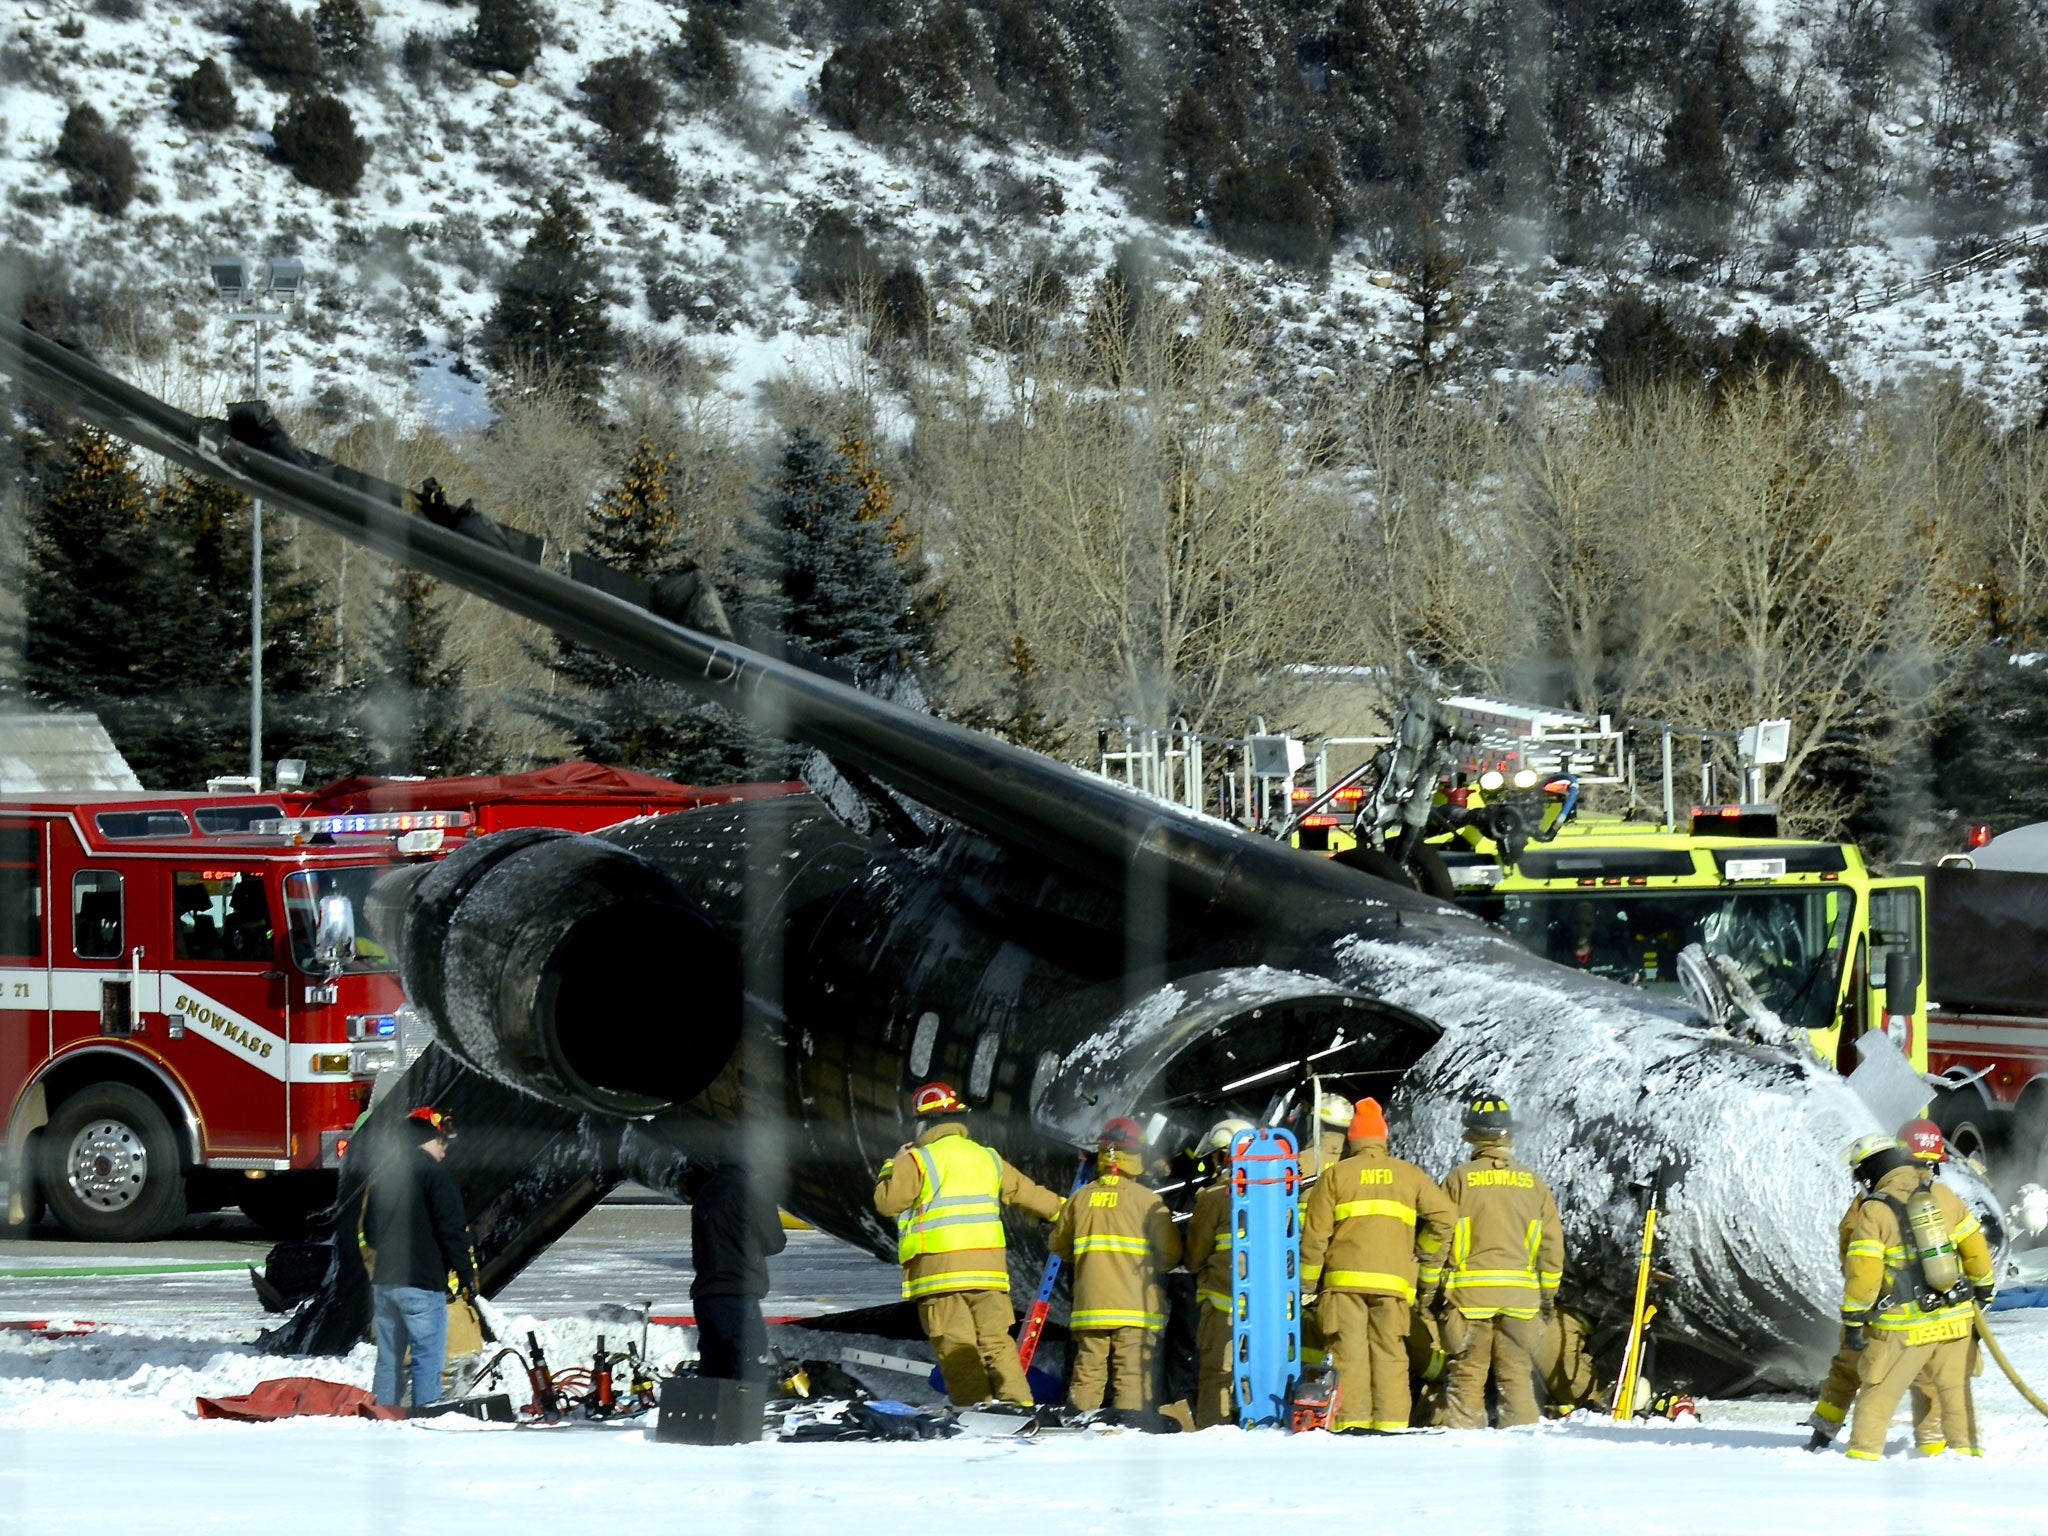 Emergency crews work near a passenger plane that crashed upon landing at the Aspen-Pitkin County Airport in Aspen, Colorado